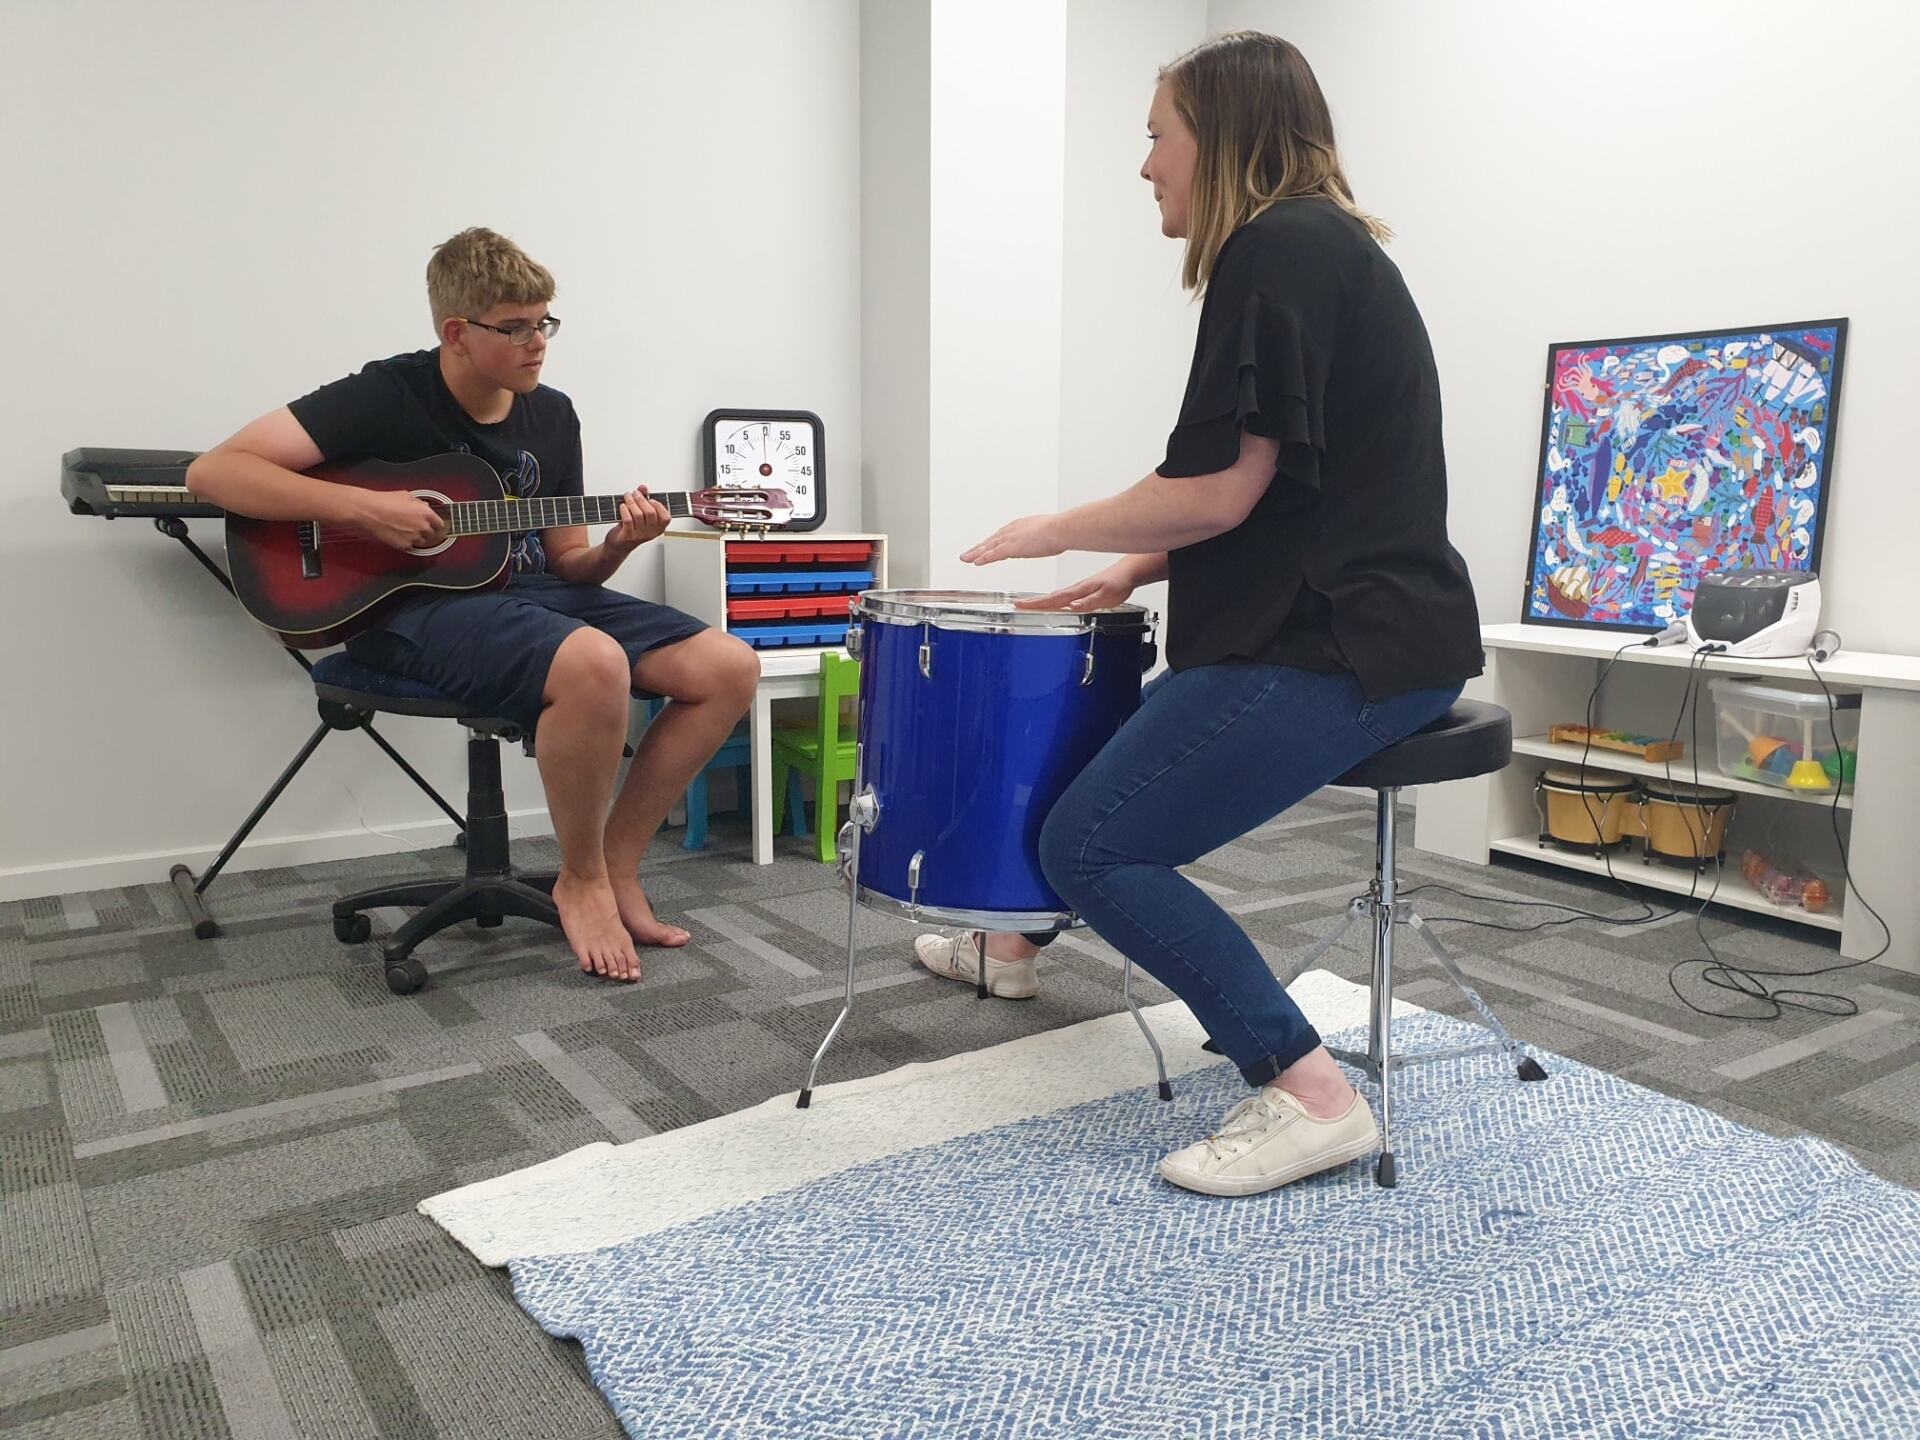 Music teacher and participant play drums and guitar together